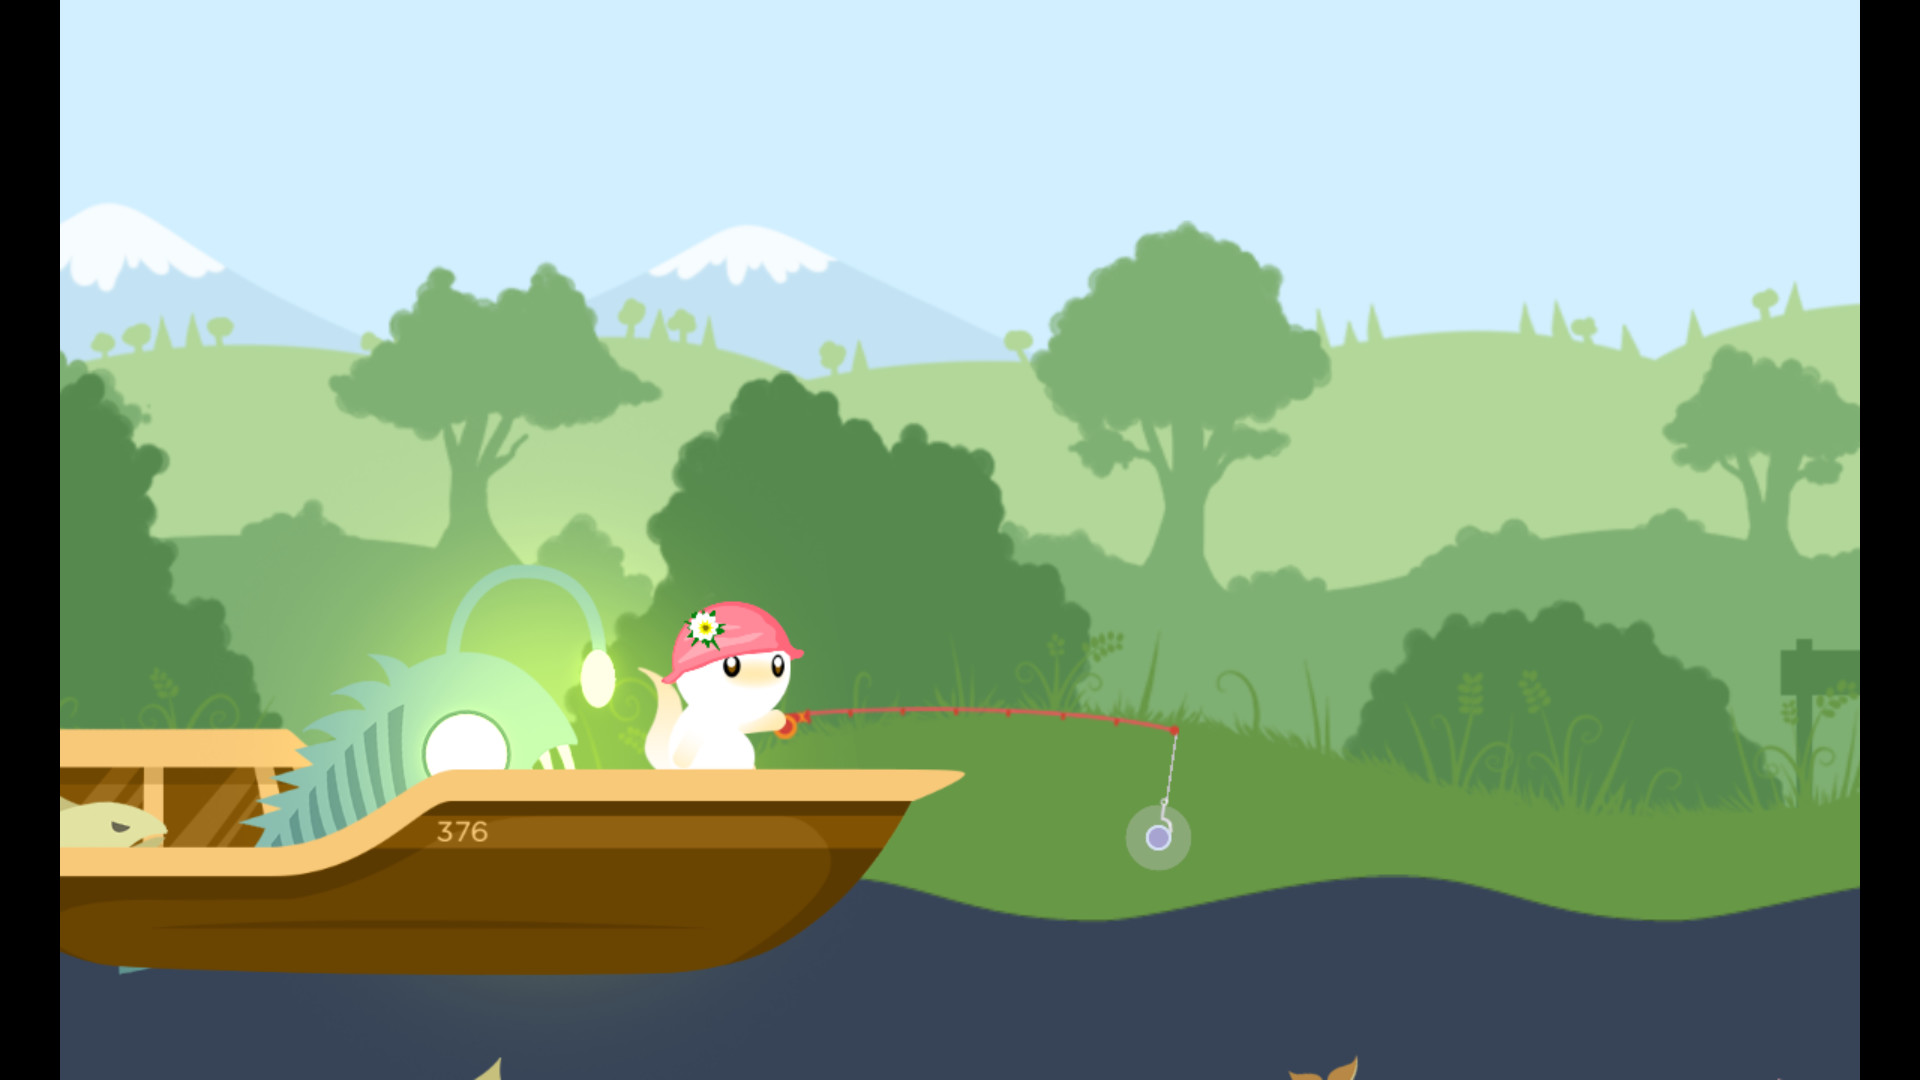 cat goes fishing lite pc download